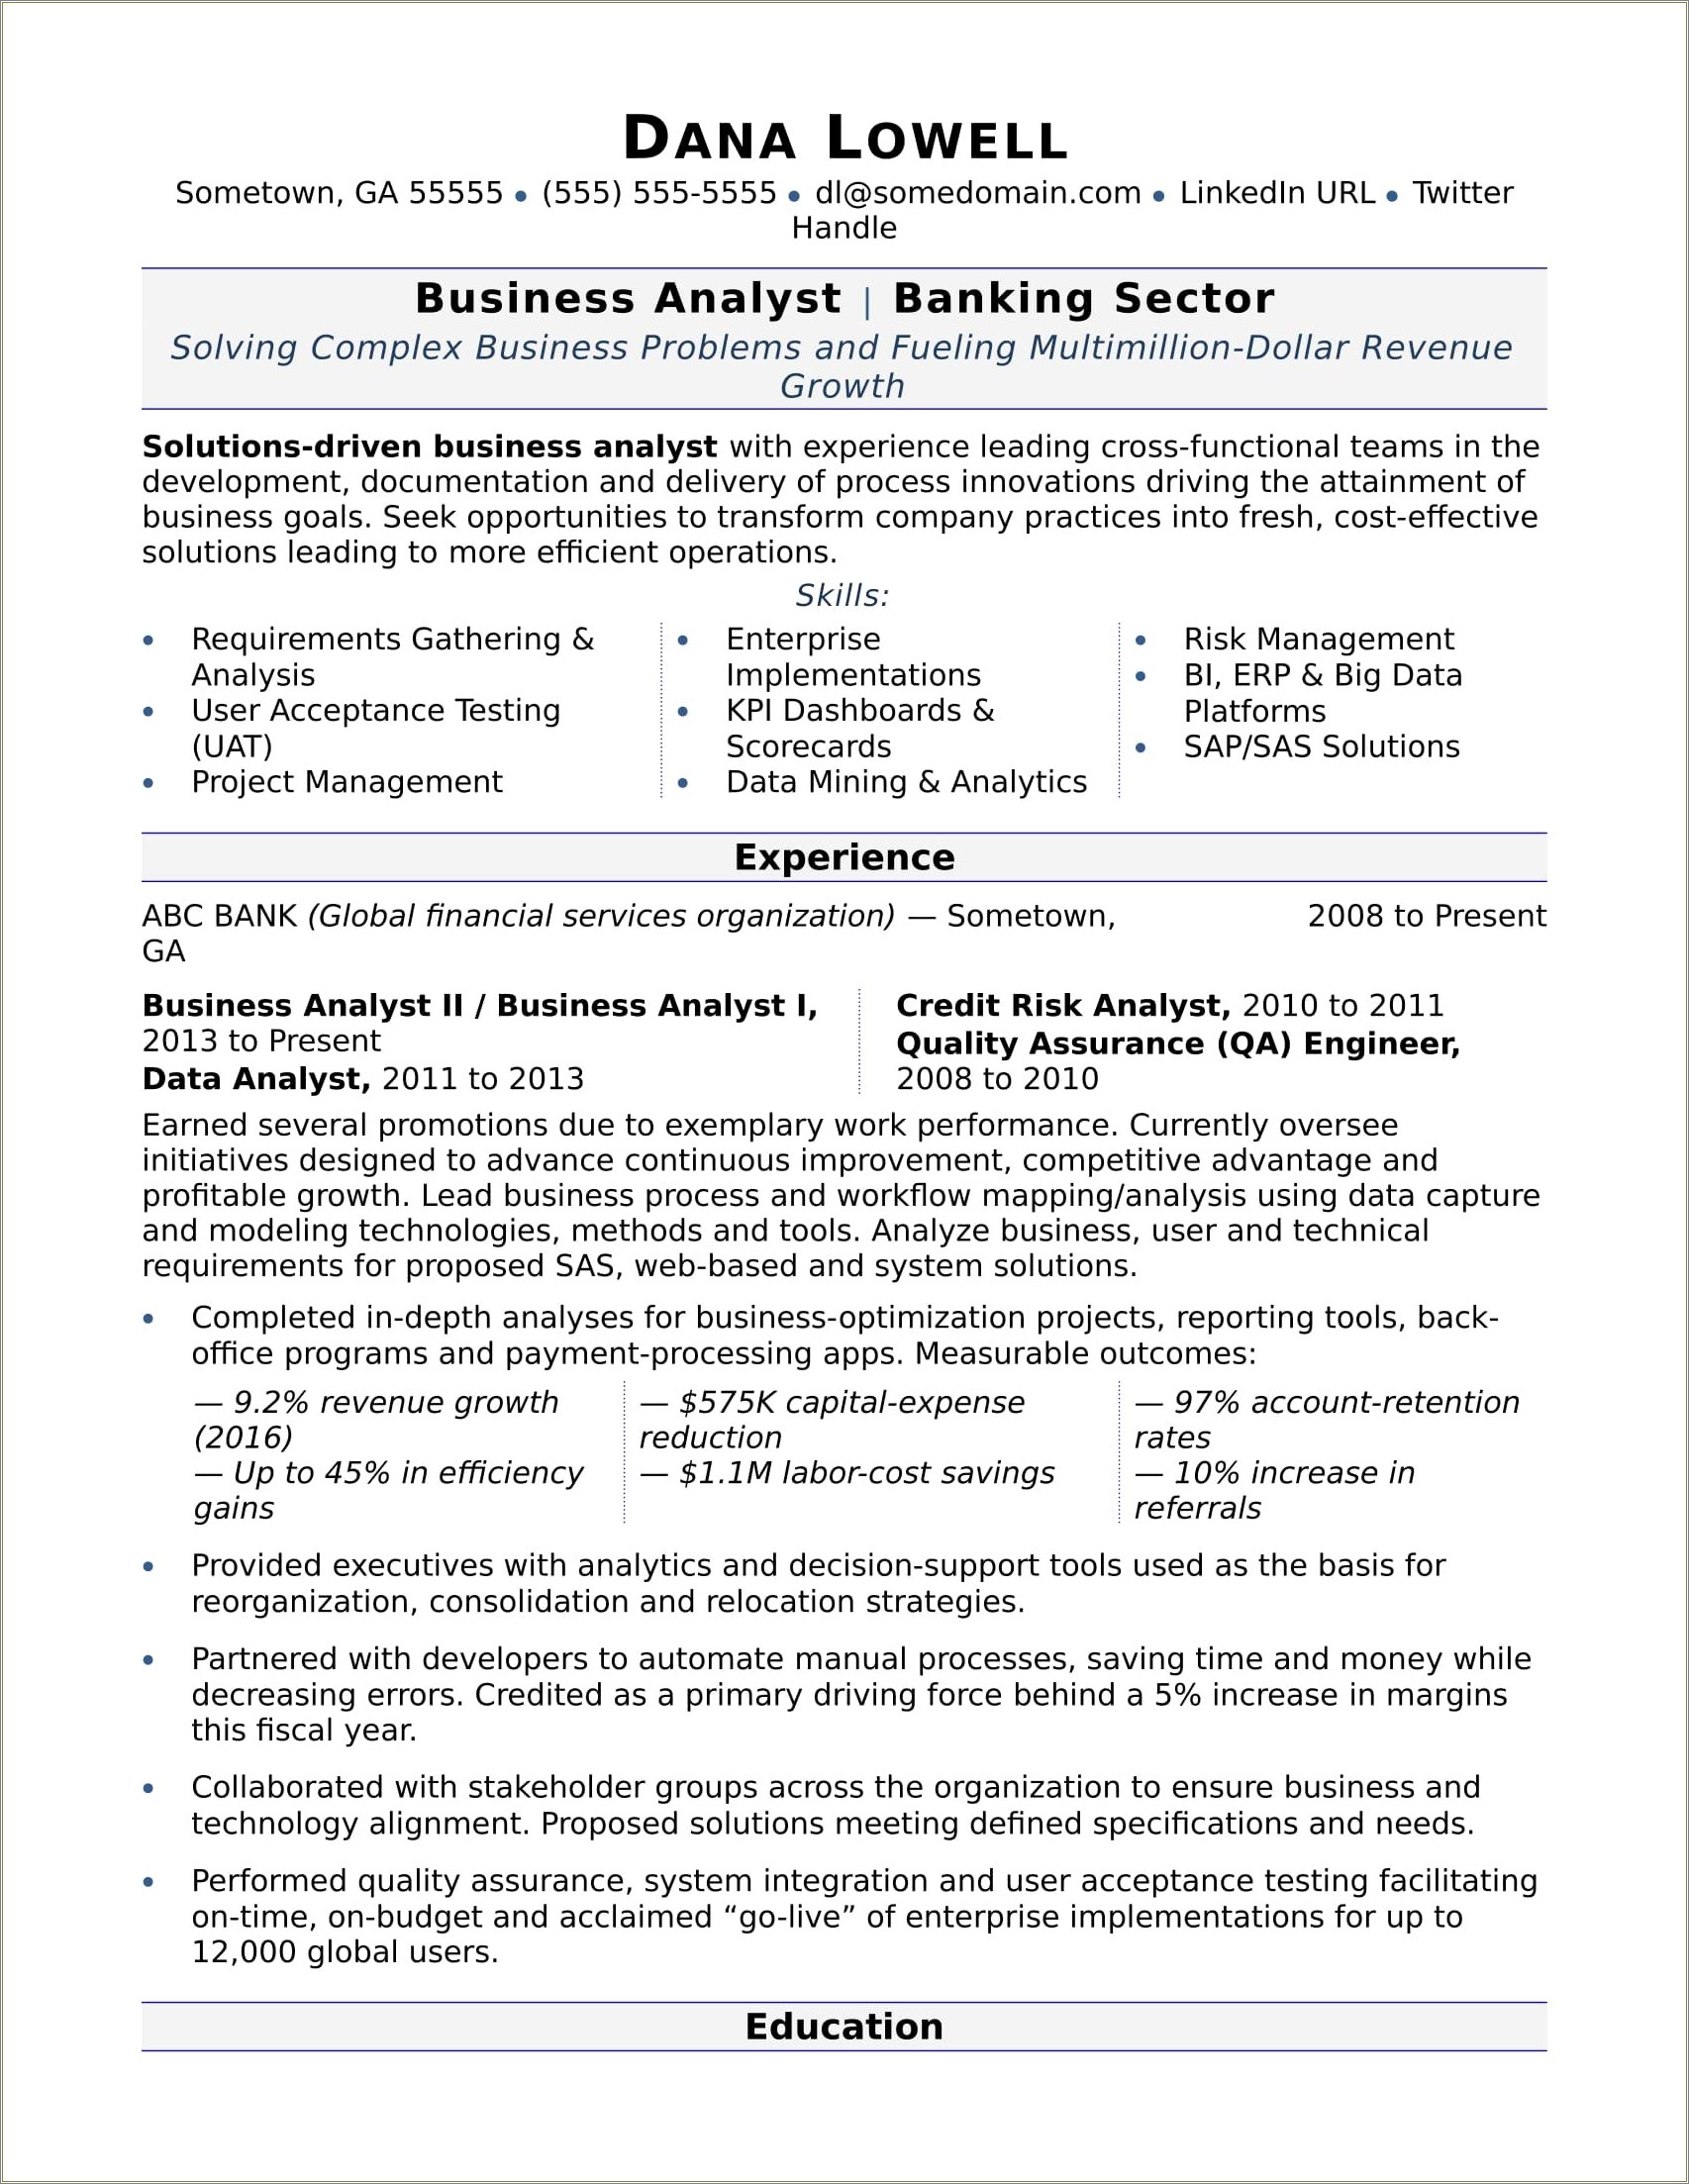 About Me Section Management Analyst Resume